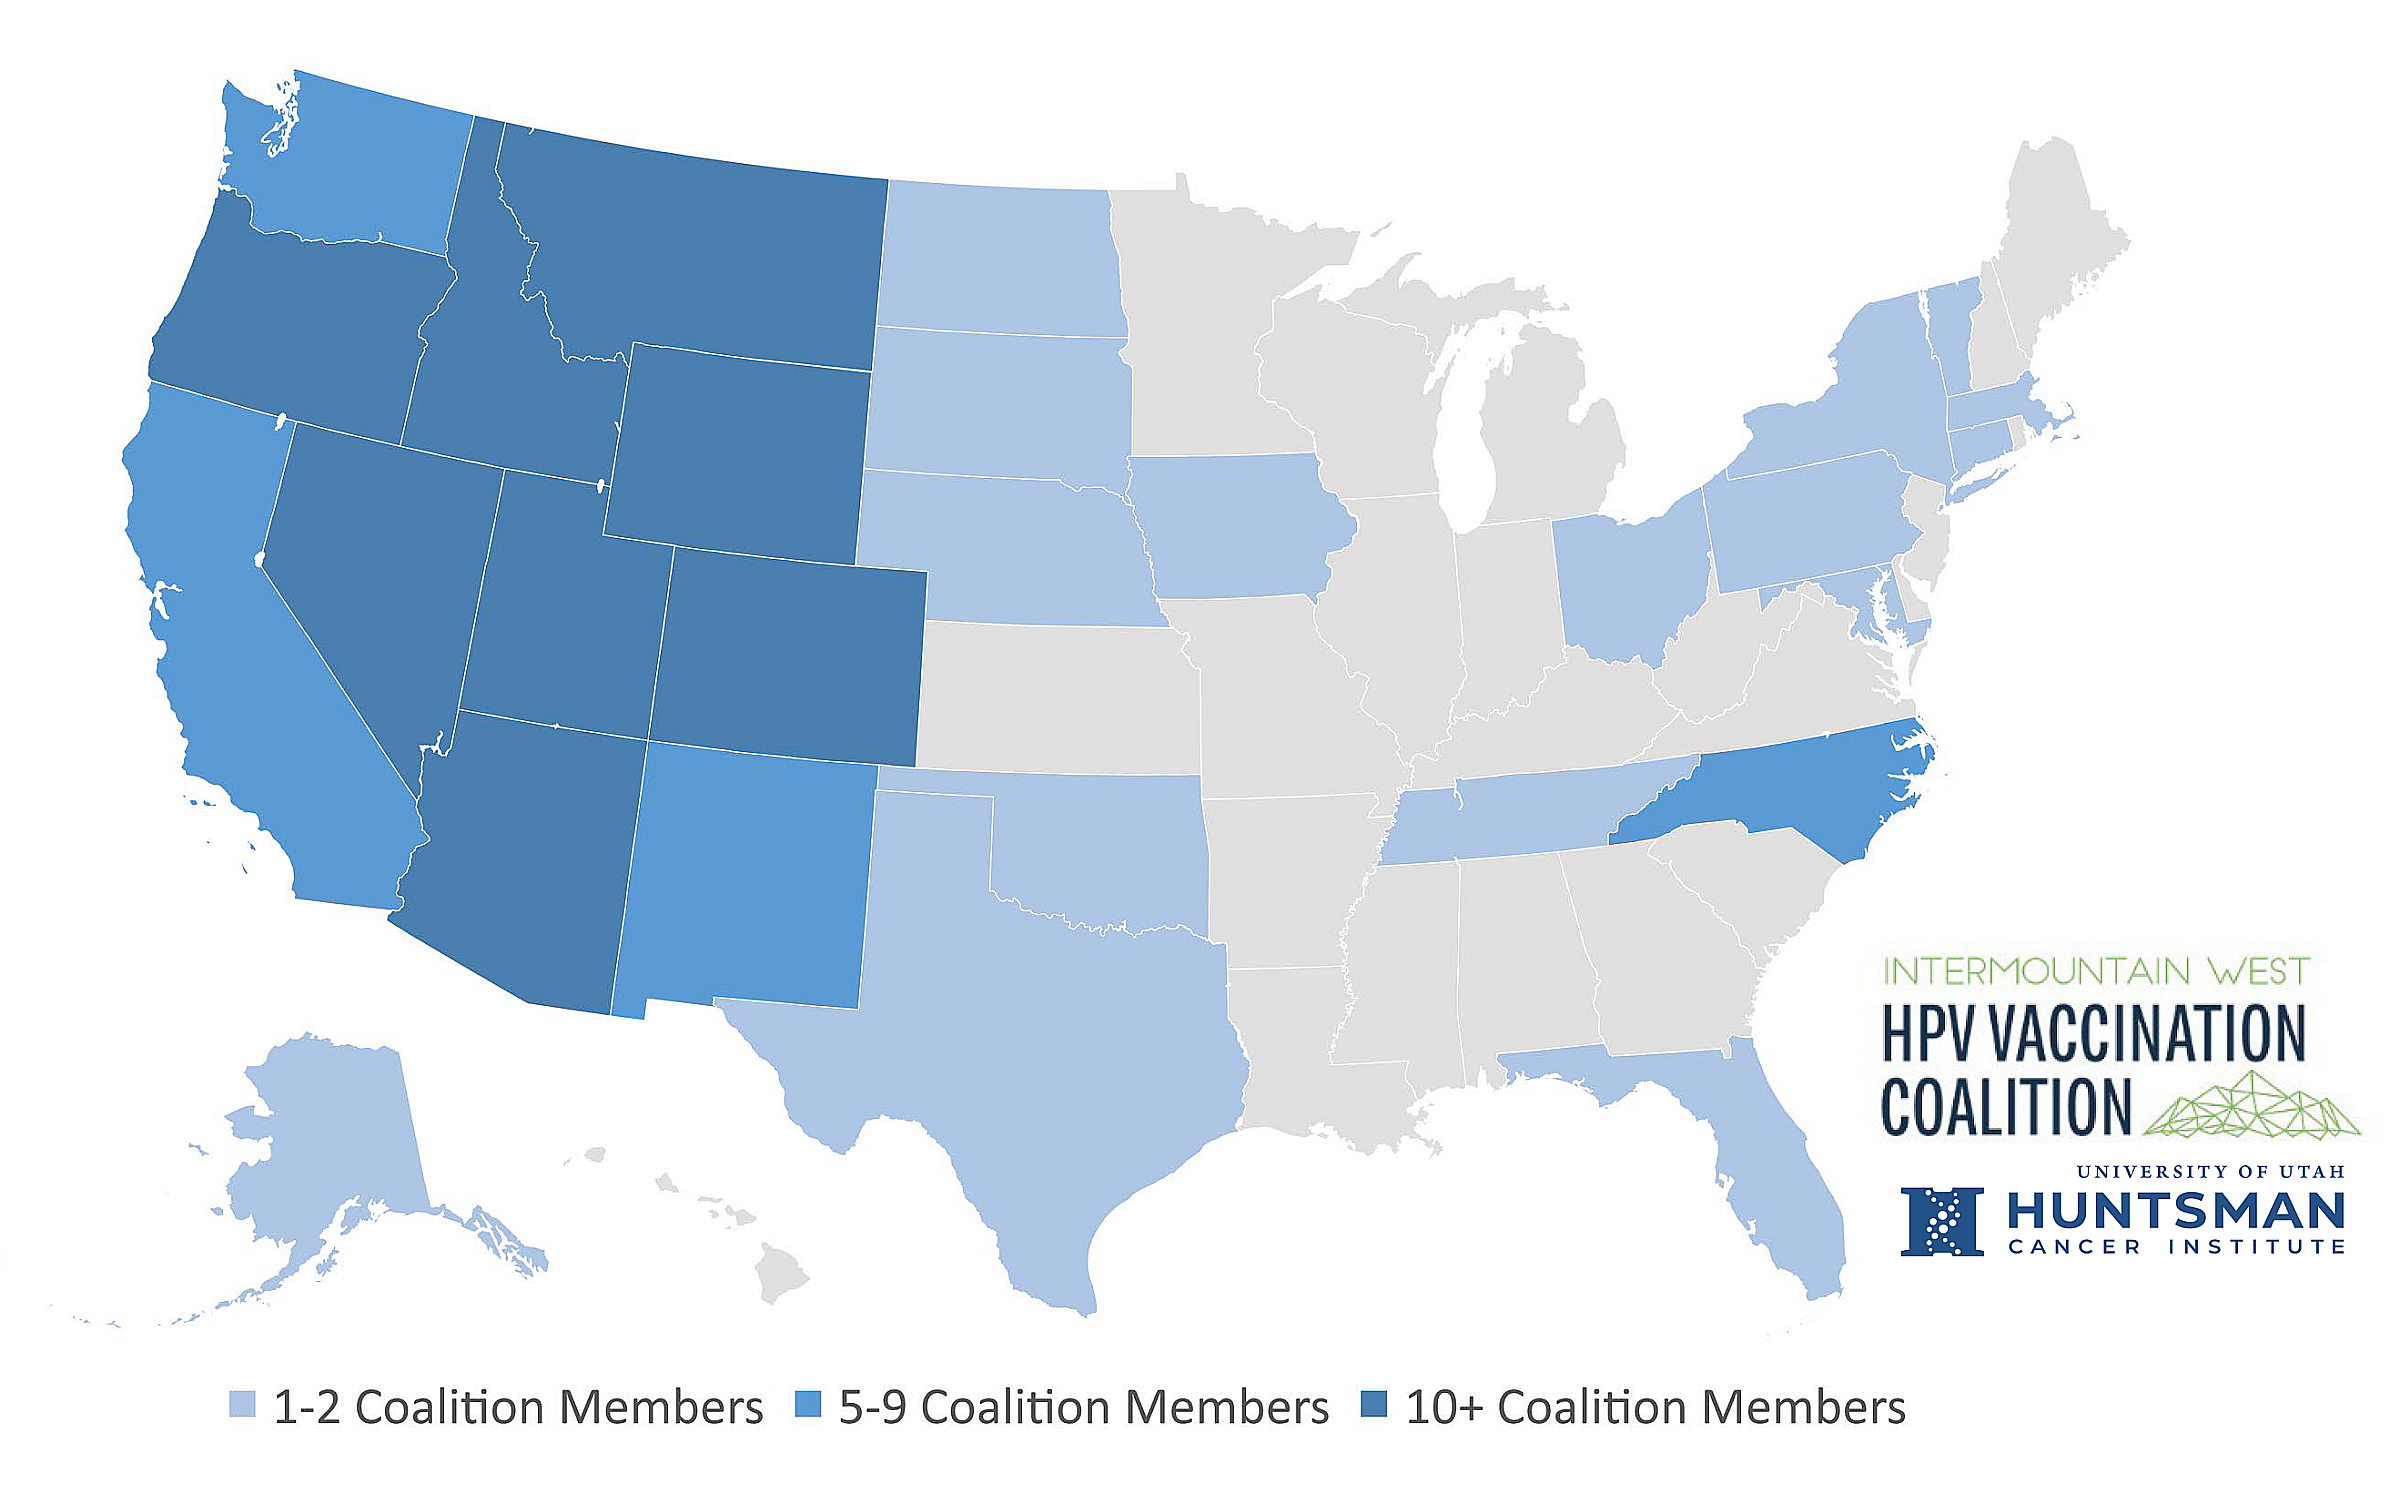 map of coalition members in the US